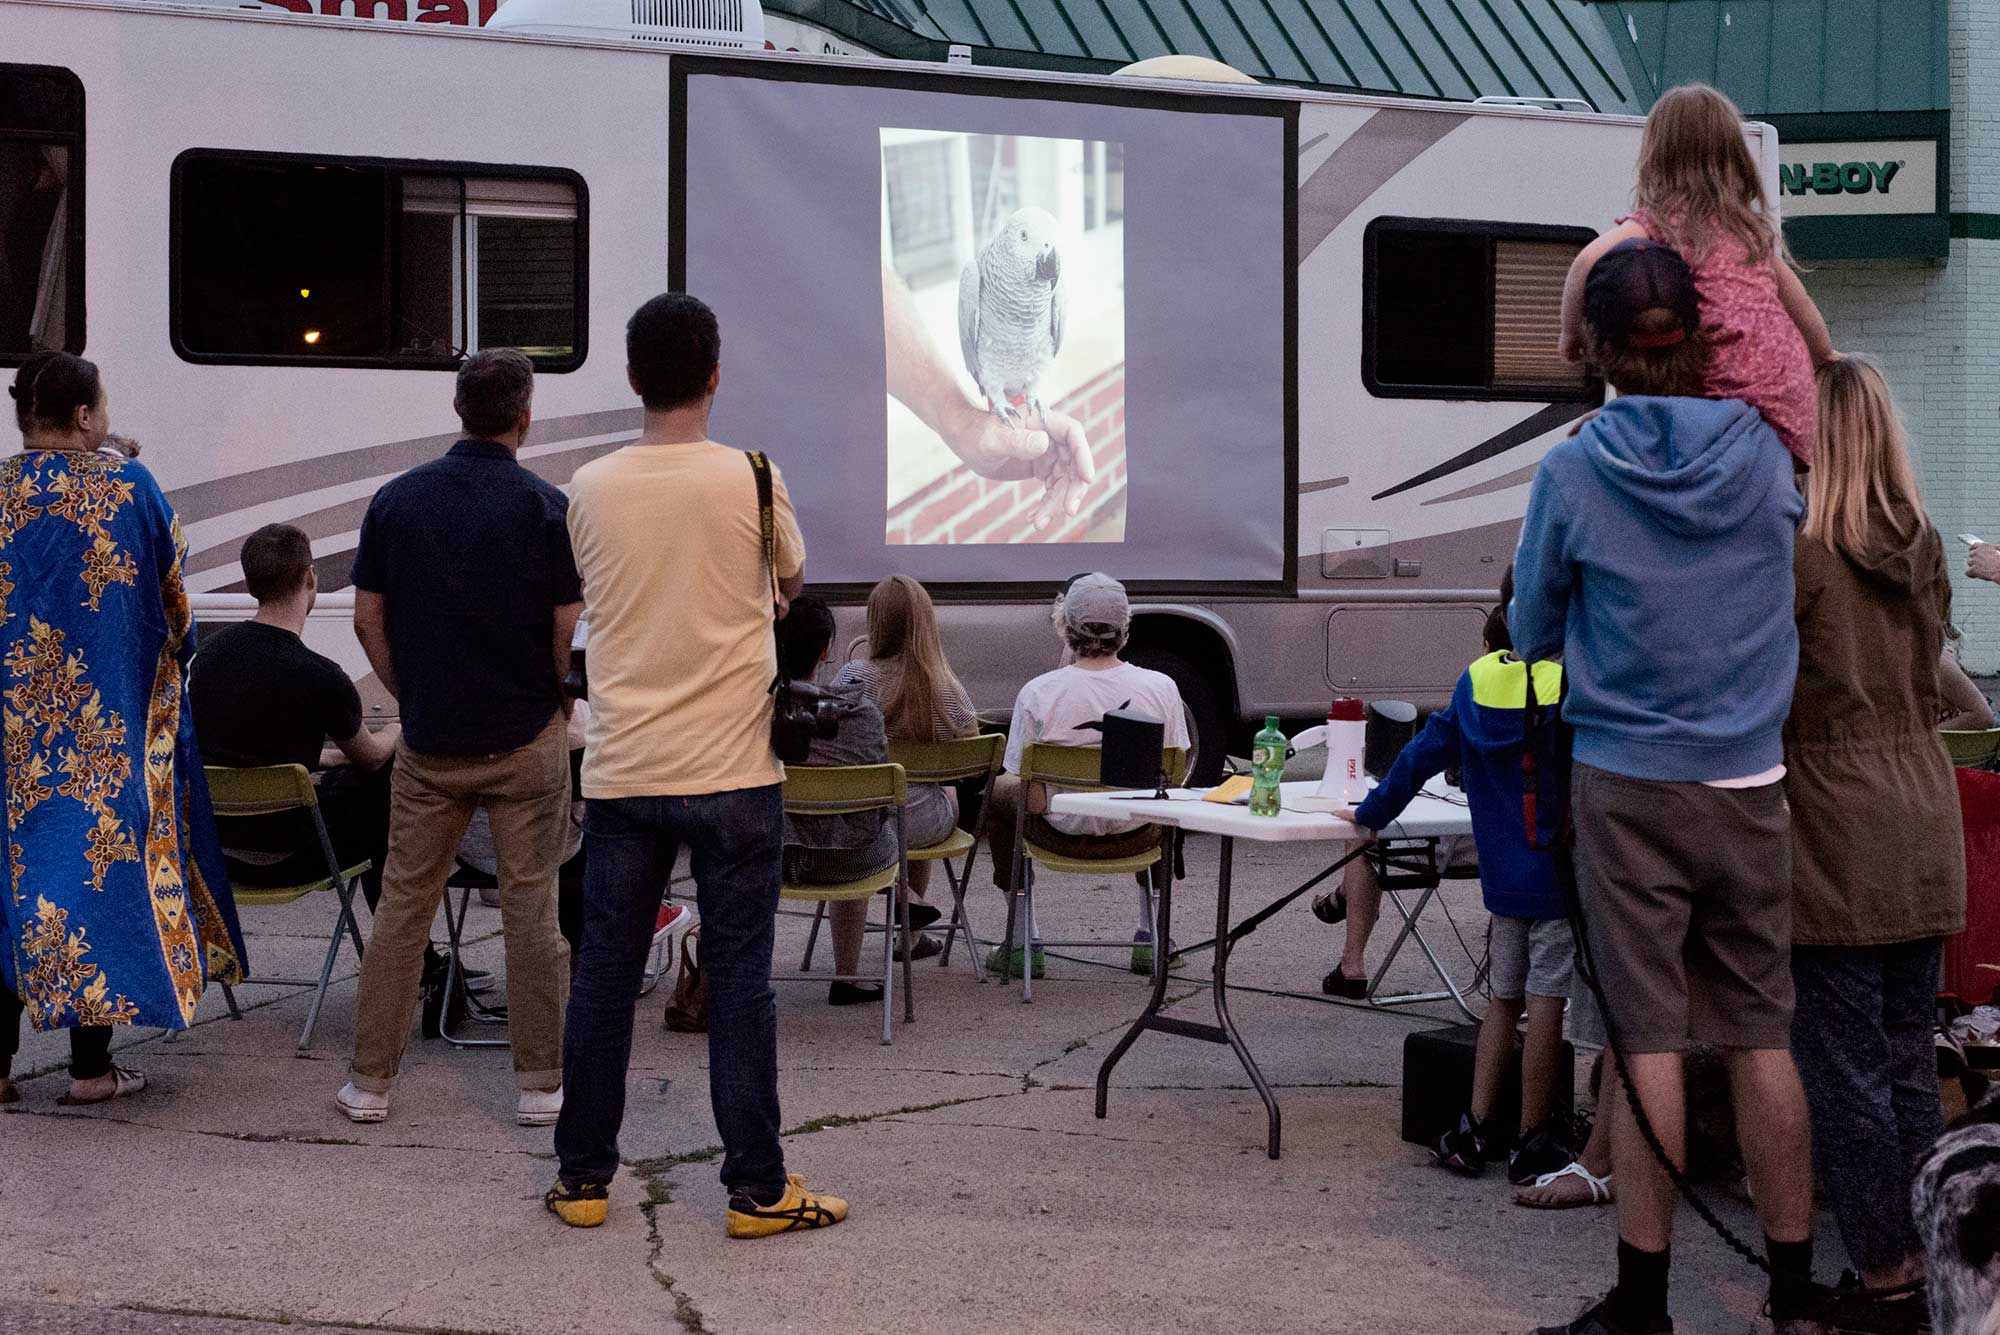 A “pop up” slideshow on the side of the RV